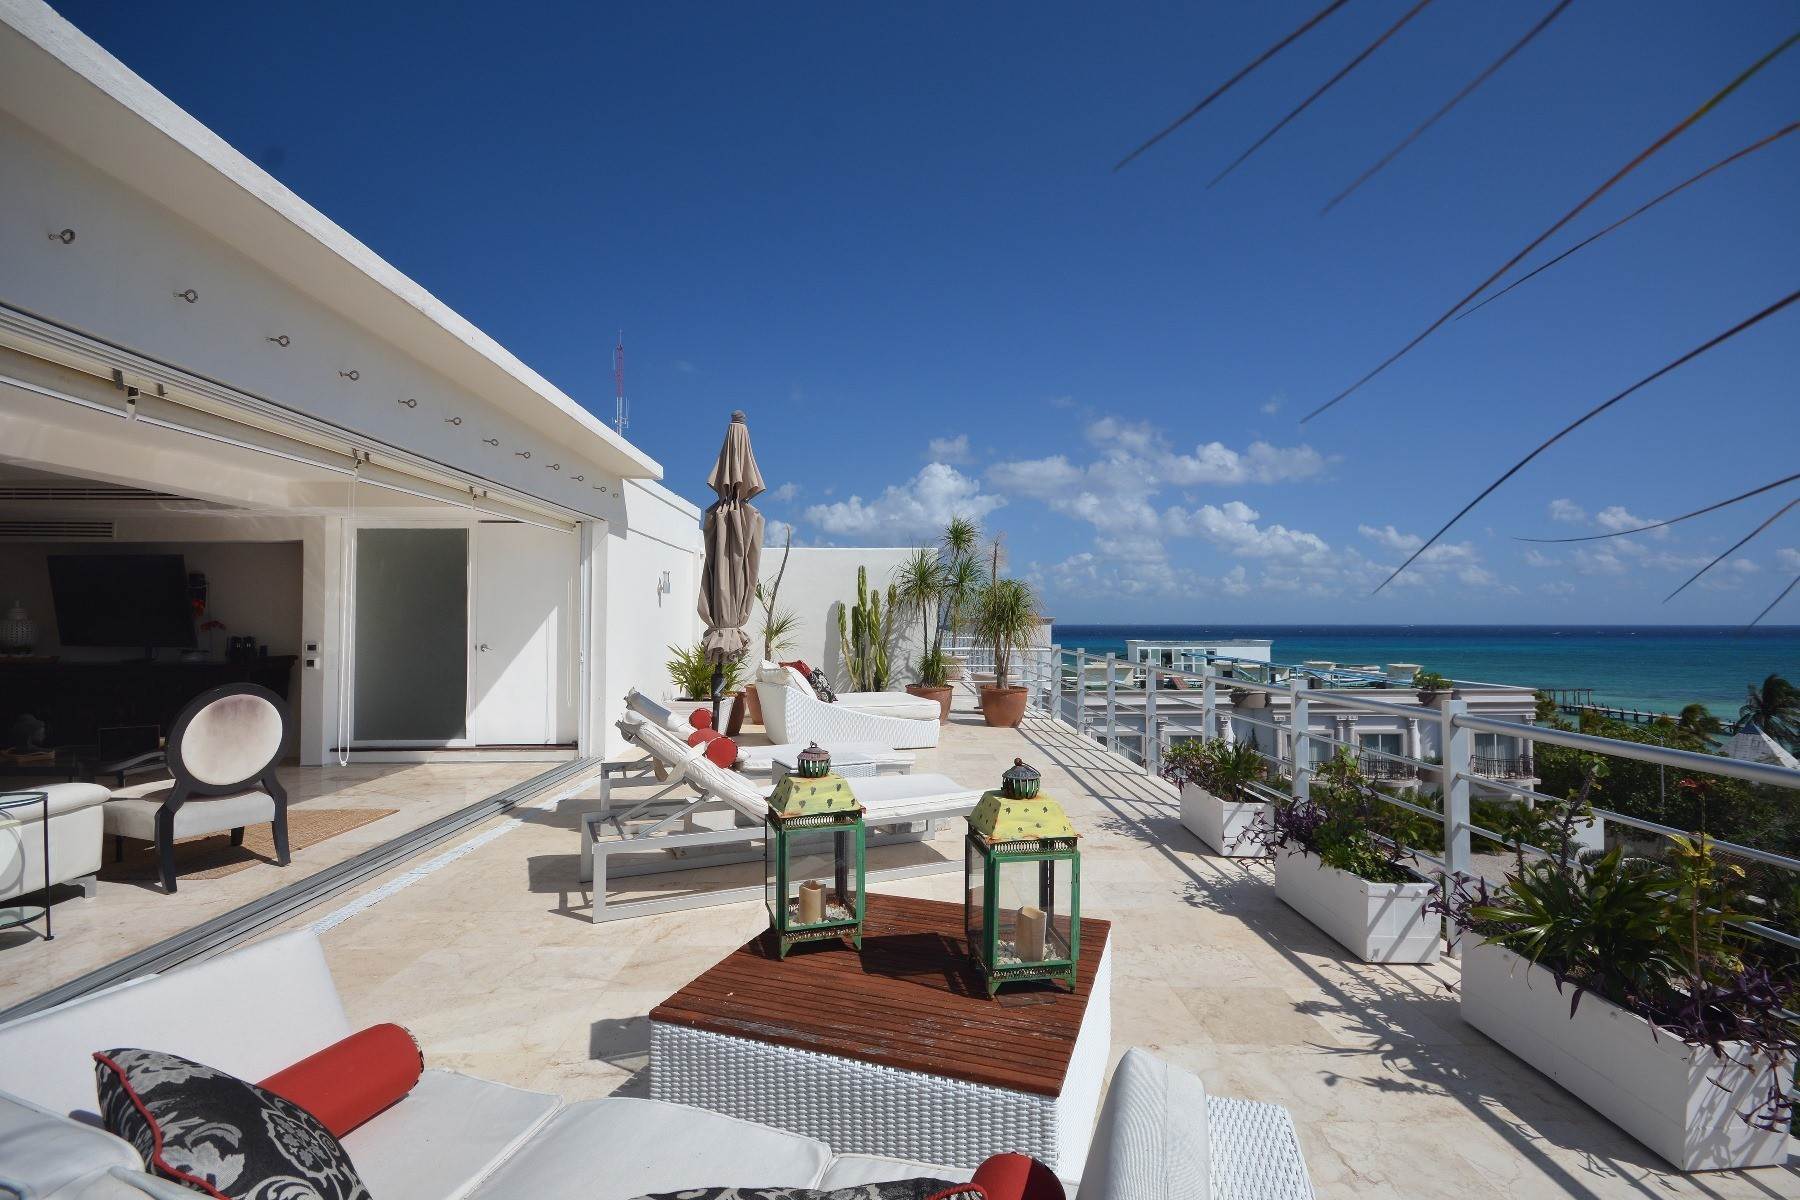 Apartments for Sale at LUXURIOUS 4 BEDROOM PENTHOUSE WITH INCREDIBLE OCEAN VIEW, Playa Del Carmen, Quintana Roo 77710 Mexico